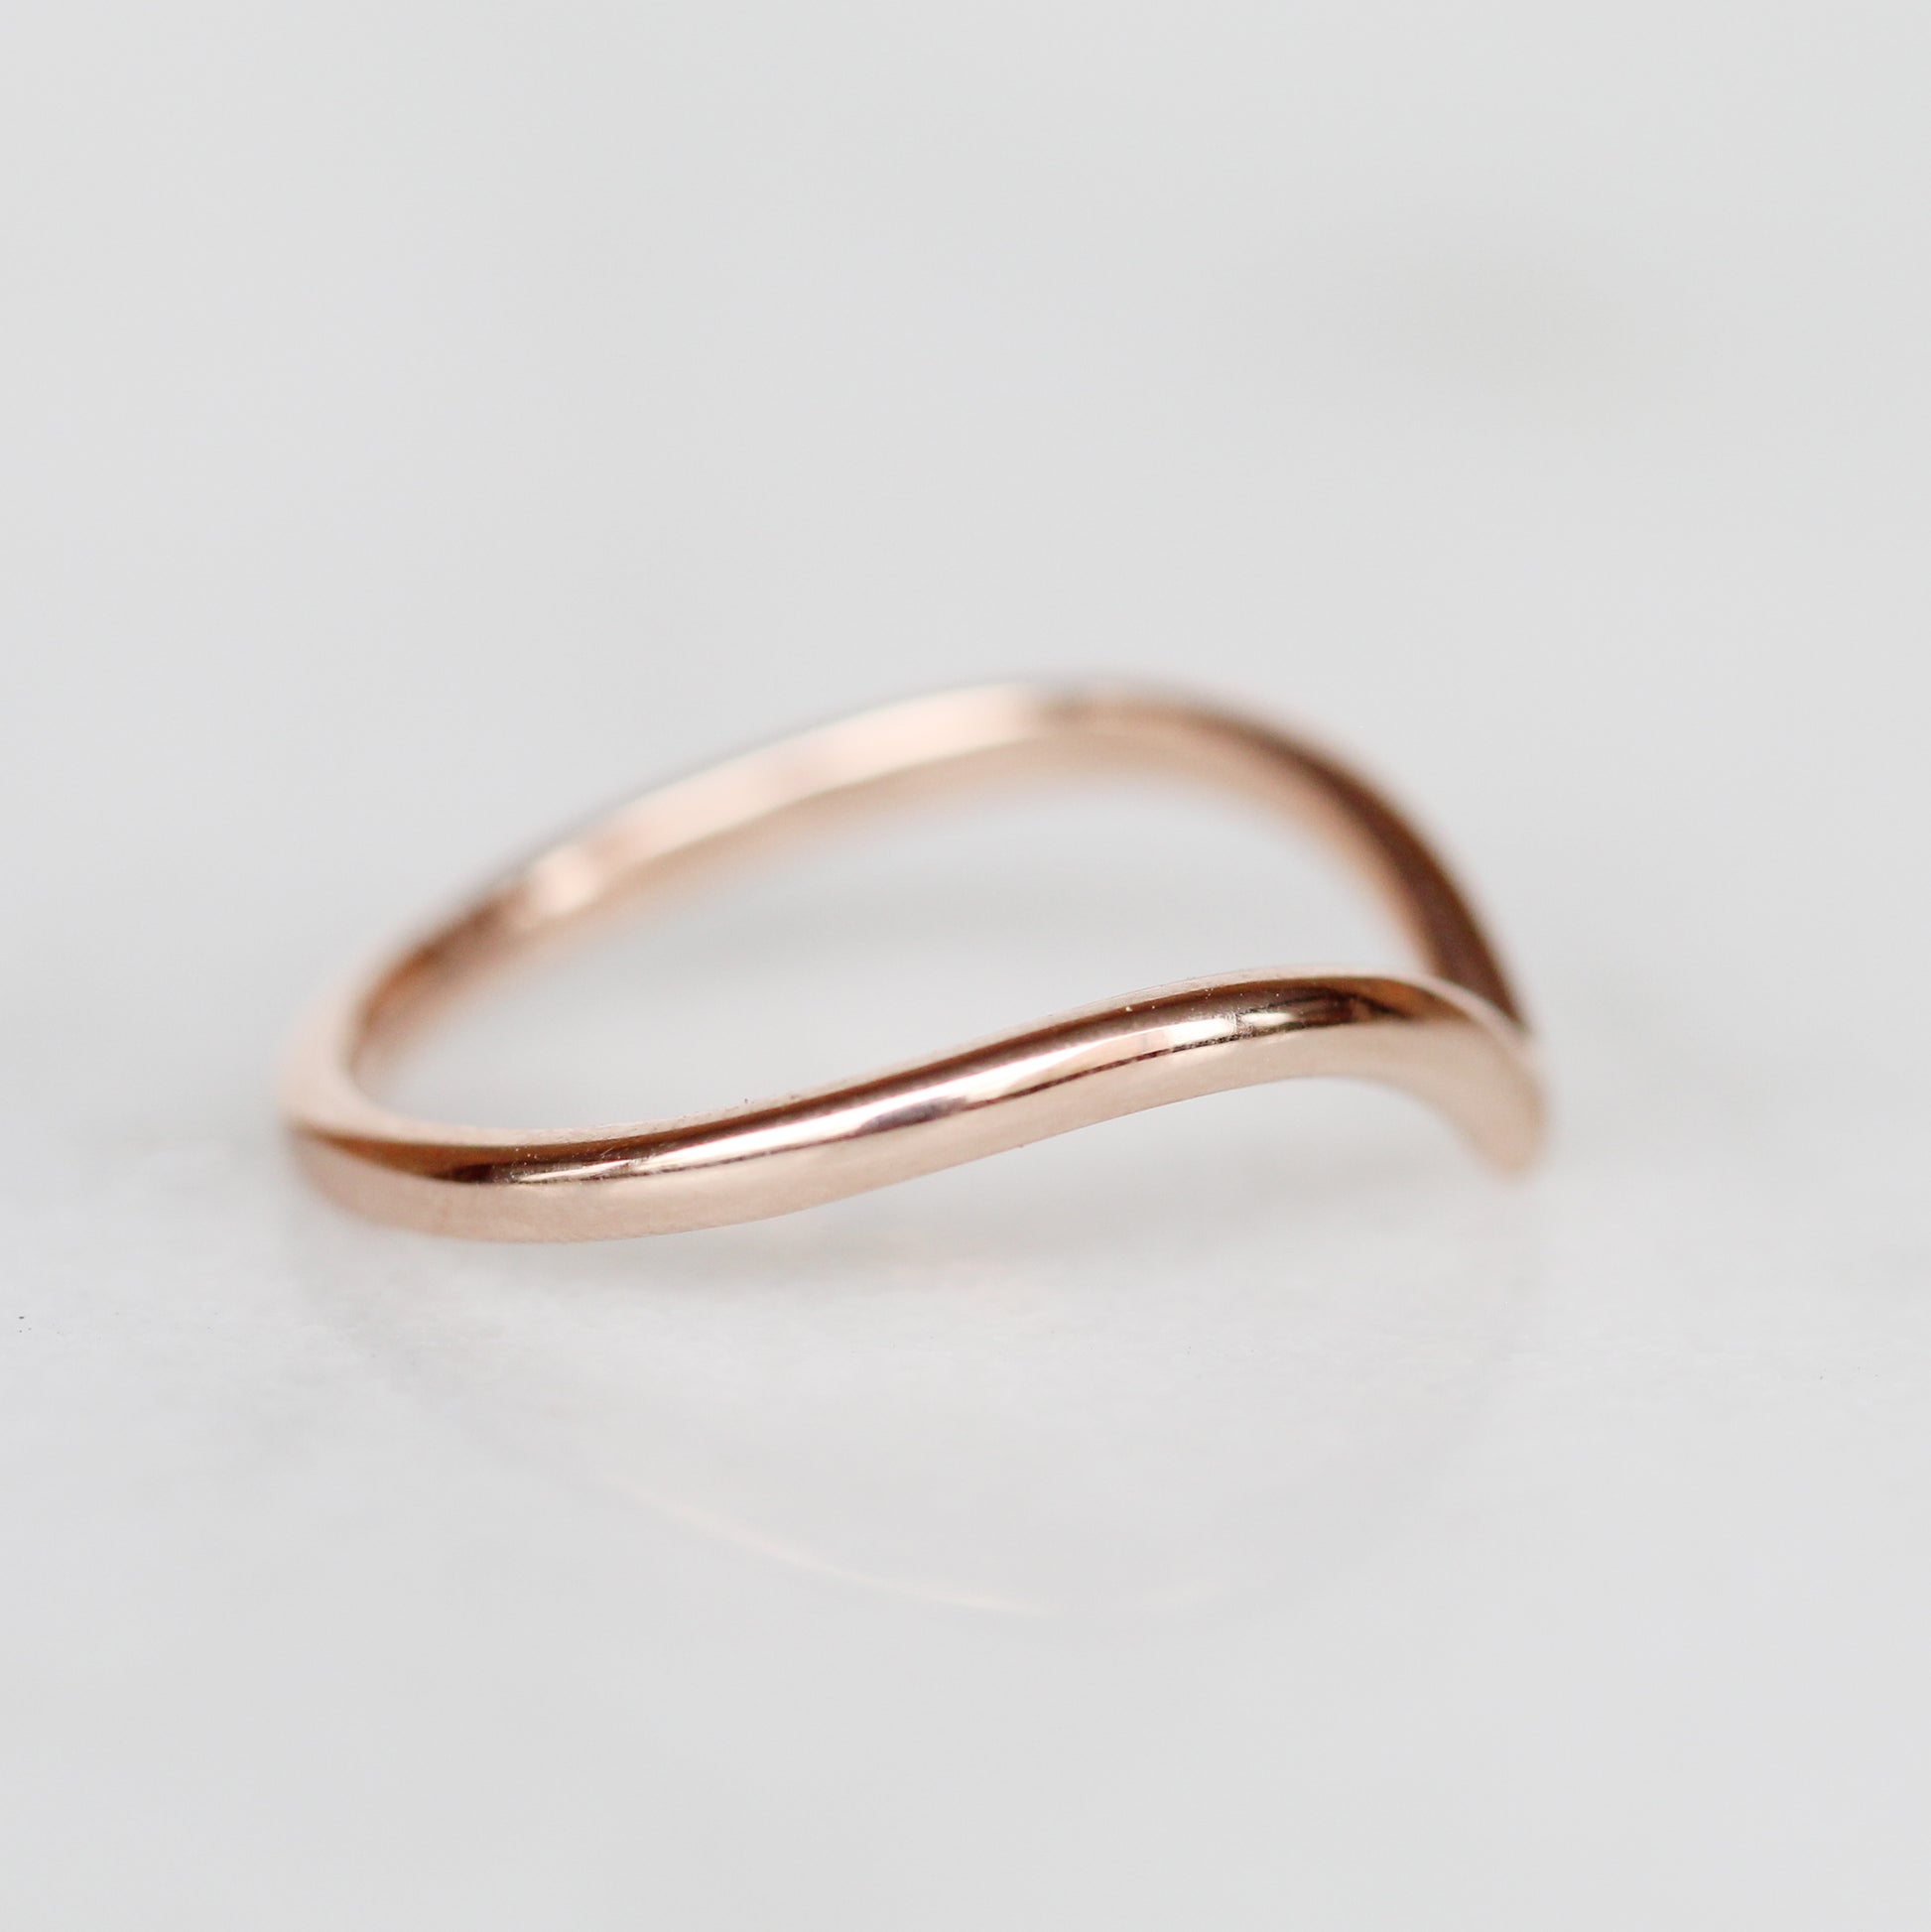 Vera wedding band - contour point V shape band - 14k gold of choice - Midwinter Co. Alternative Bridal Rings and Modern Fine Jewelry